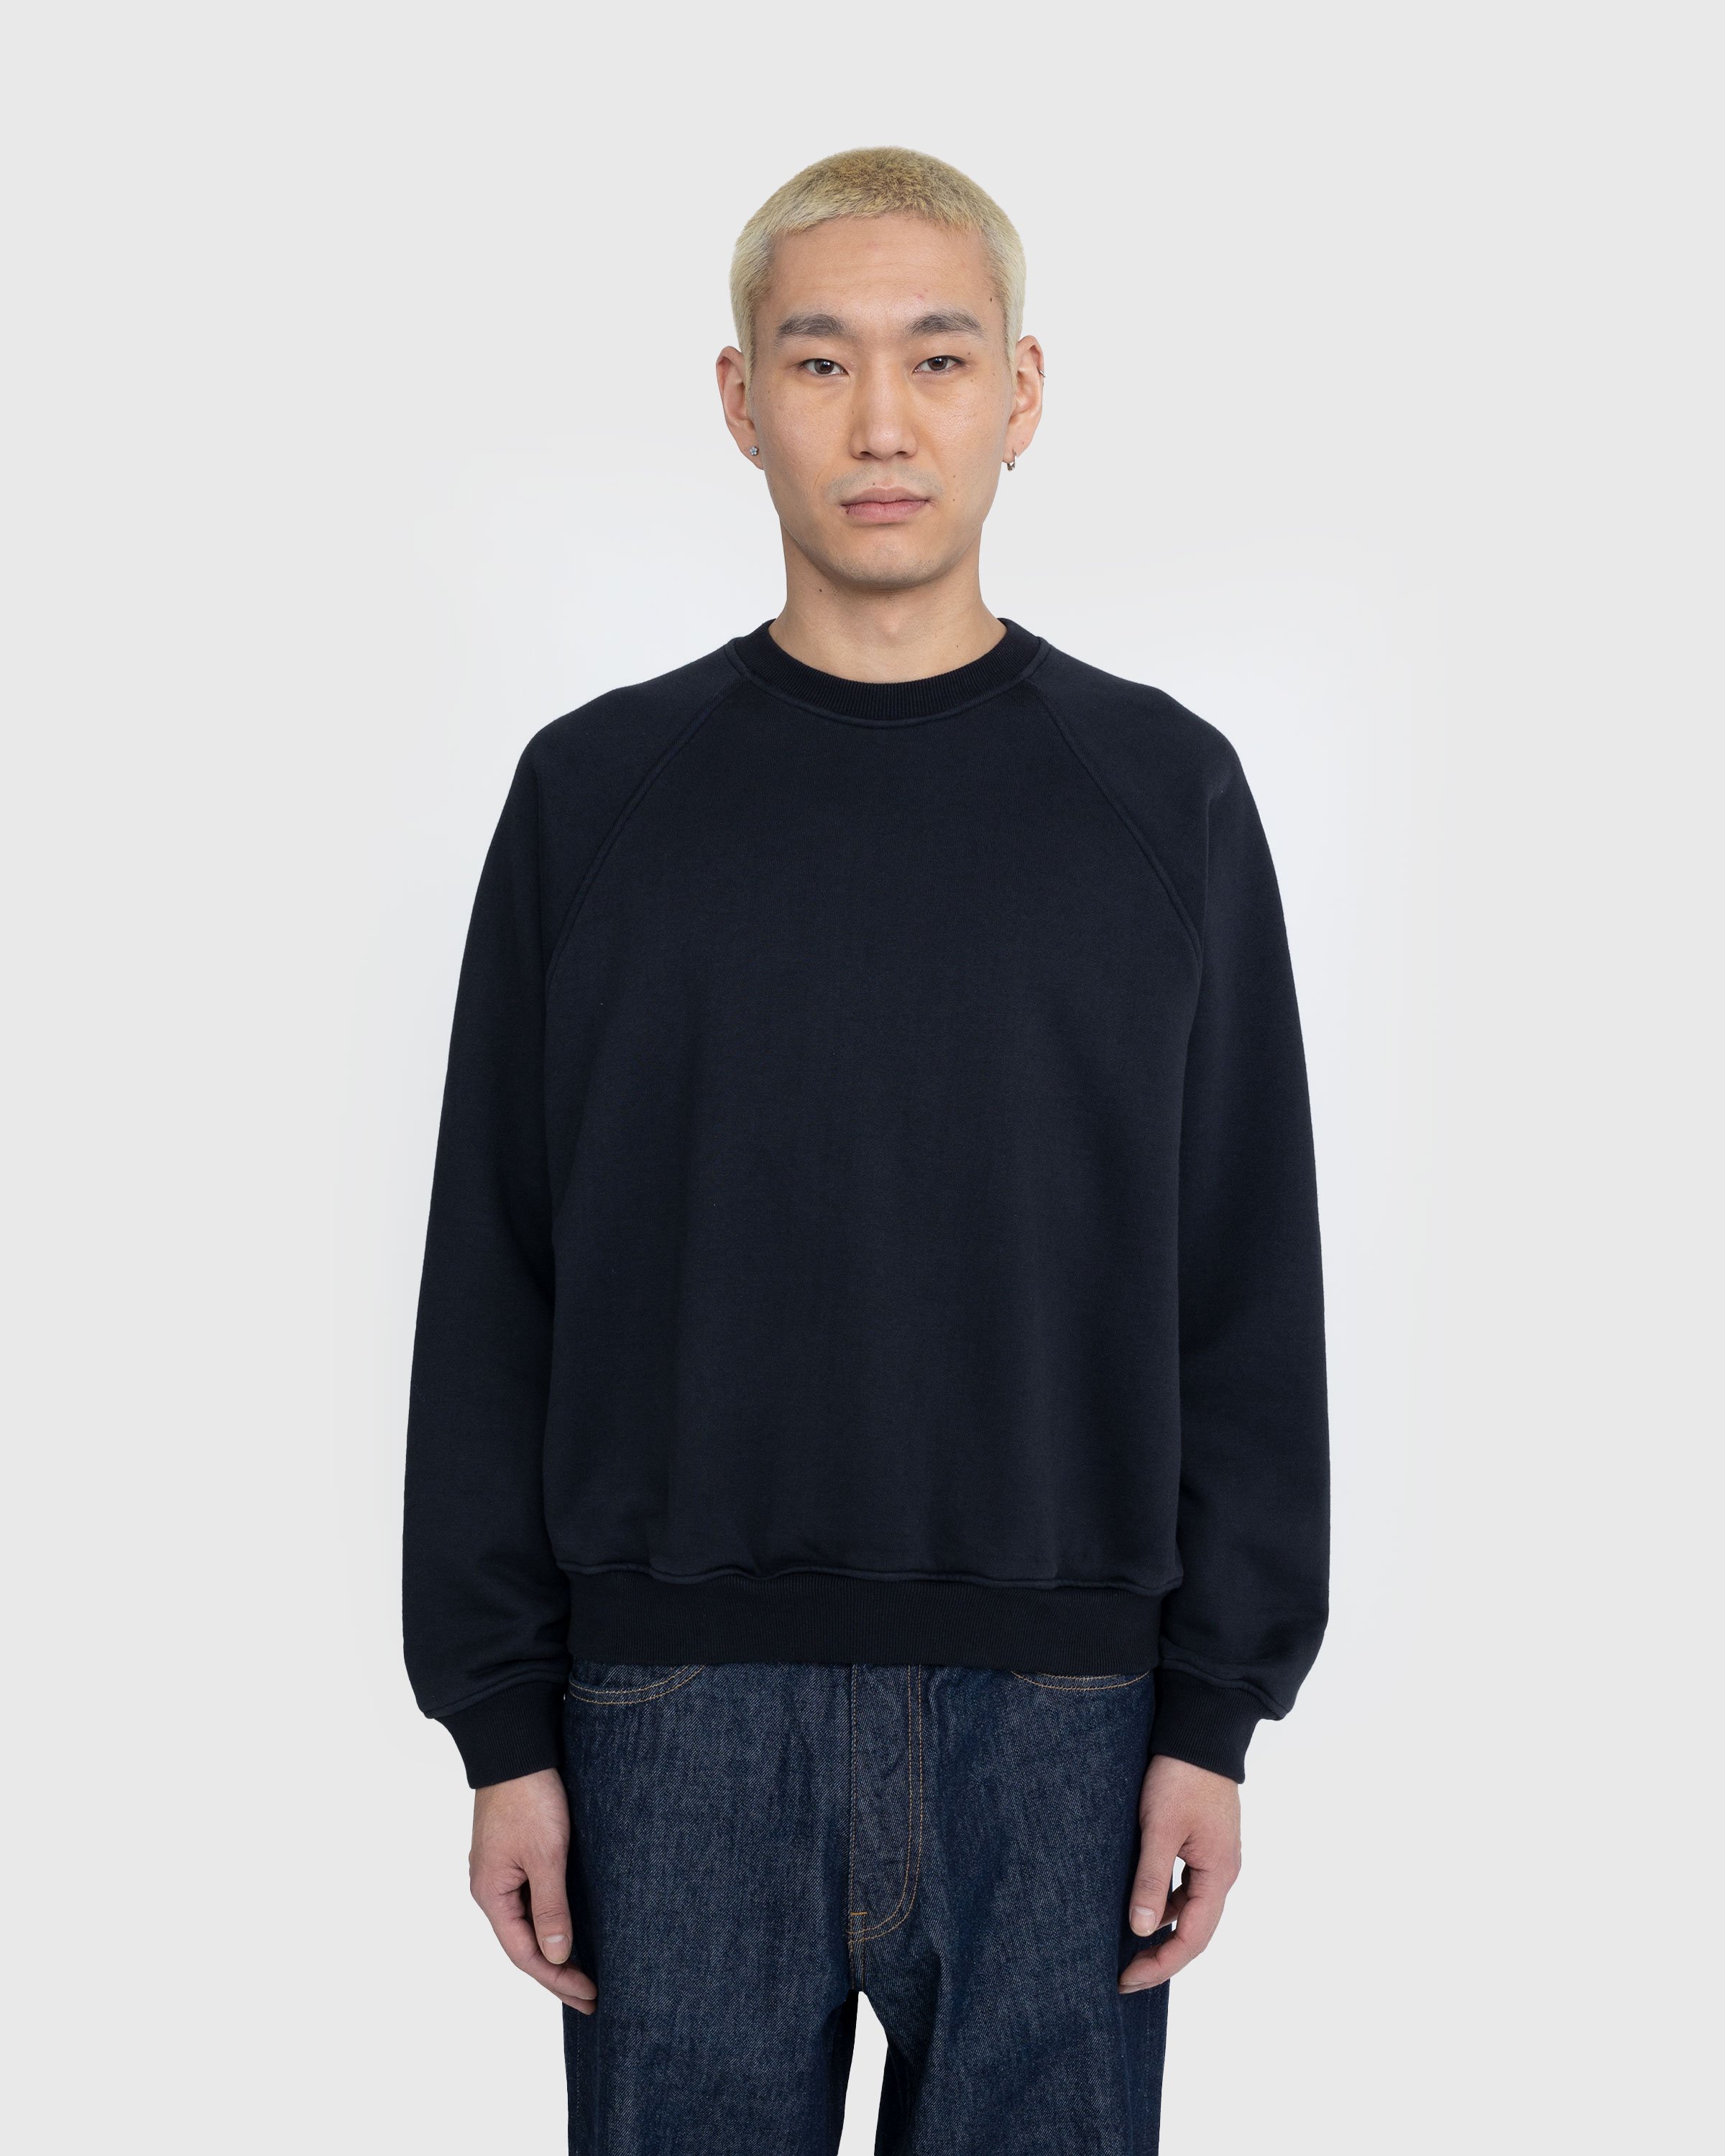 Auralee - Smooth Soft Sweat Pullover Black - Clothing - Black - Image 2